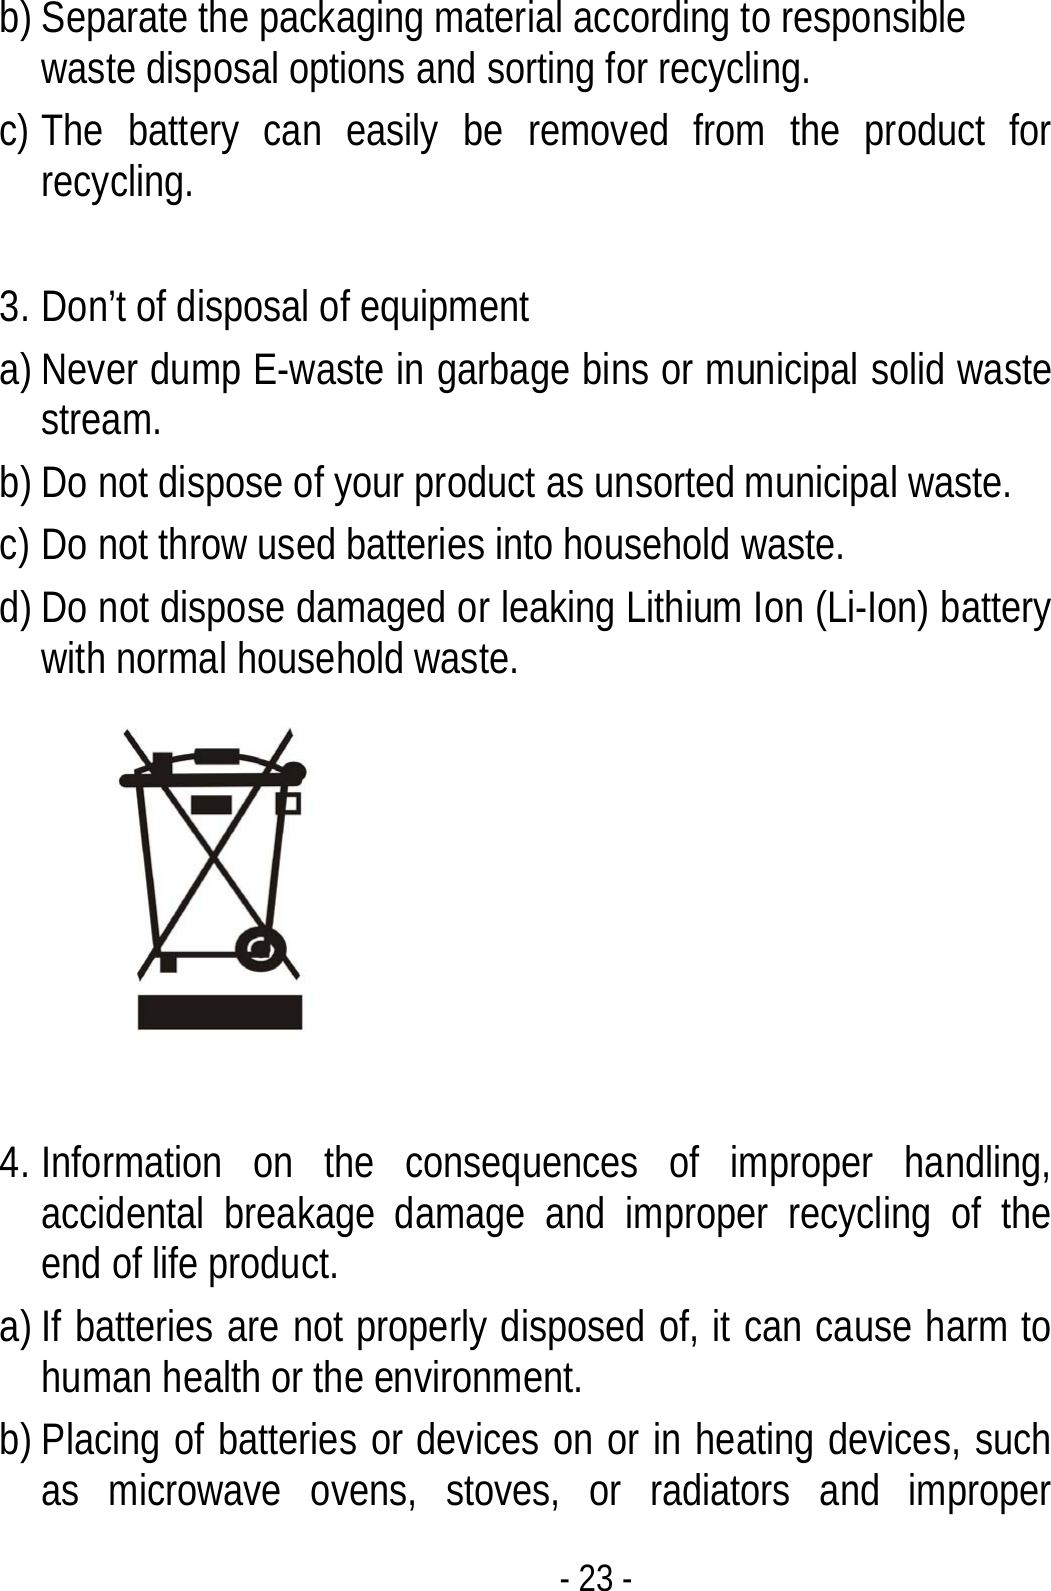  - 23 - b) Separate the packaging material according to responsible waste disposal options and sorting for recycling.   c) The battery can easily be removed from the product for recycling.   3. Don’t of disposal of equipment   a) Never dump E-waste in garbage bins or municipal solid waste stream.  b) Do not dispose of your product as unsorted municipal waste.   c) Do not throw used batteries into household waste. d) Do not dispose damaged or leaking Lithium Ion (Li-Ion) battery with normal household waste.   4. Information on the consequences of improper handling, accidental breakage damage and improper recycling of the end of life product. a) If batteries are not properly disposed of, it can cause harm to human health or the environment. b) Placing of batteries or devices on or in heating devices, such as microwave ovens, stoves, or radiators and improper 